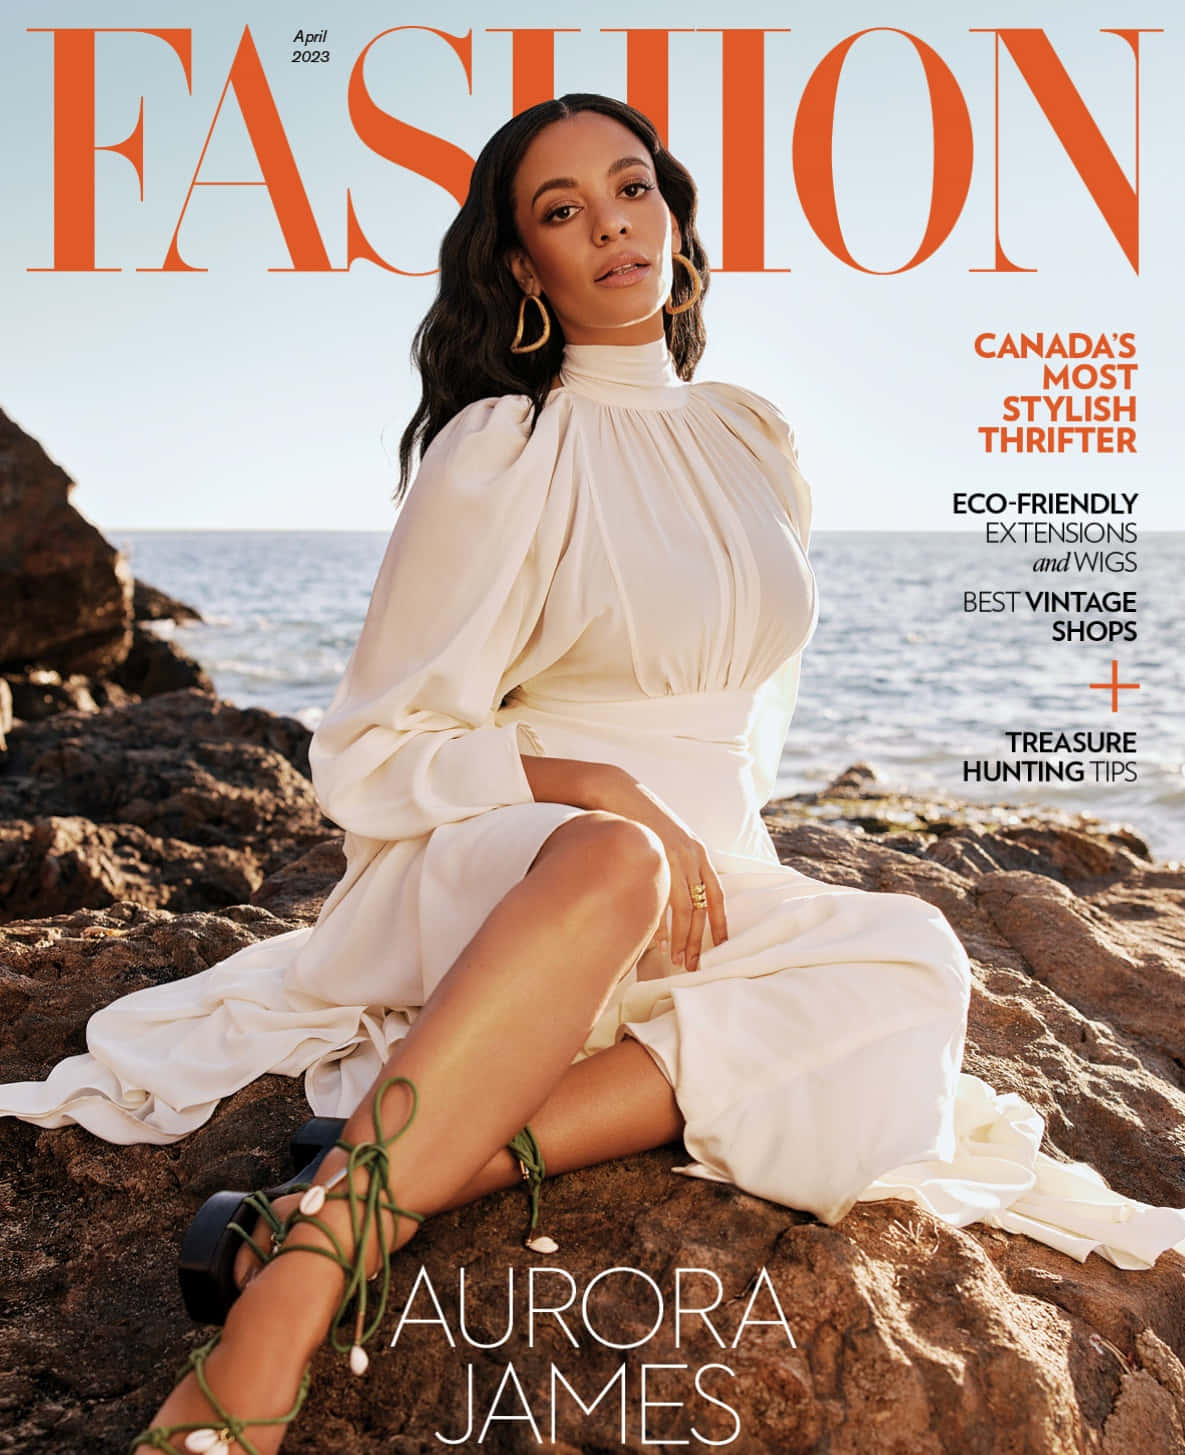 A Woman In White Sitting On Rocks On The Cover Of Fashion Magazine